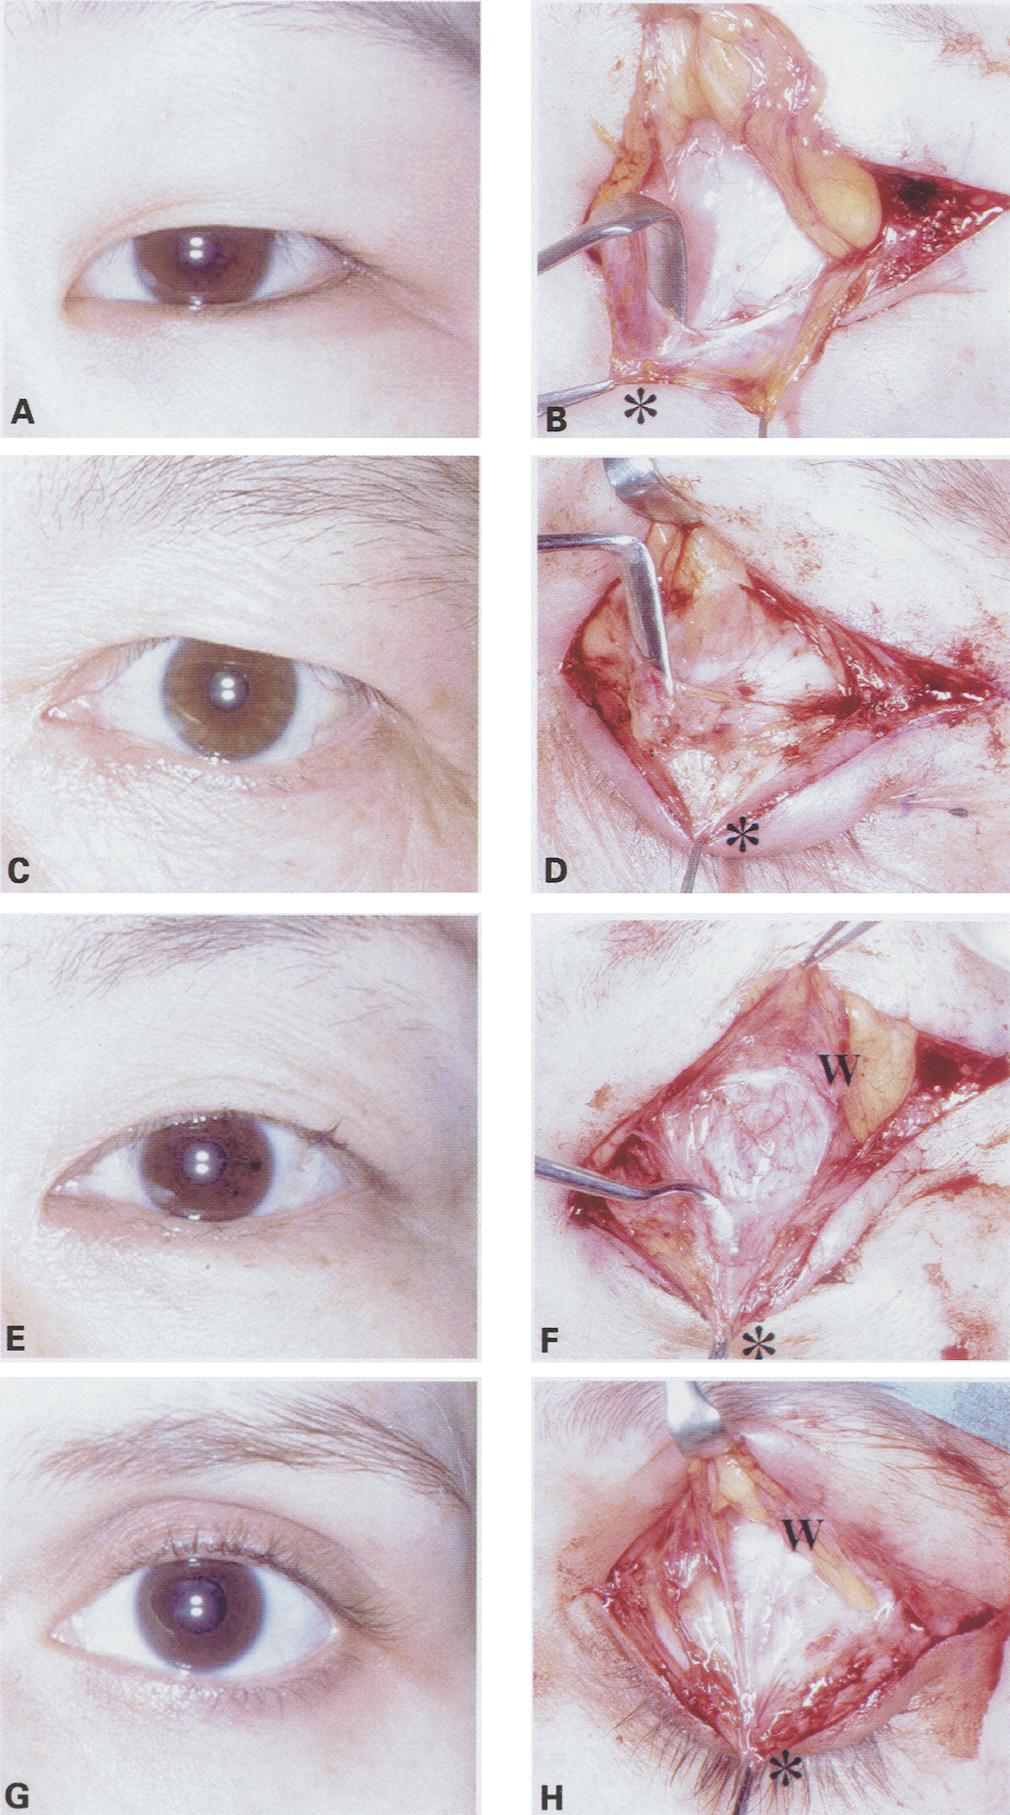 (A, B) A puffy eyelid with a narrow palpebral fissure has a robust ligamentous structure. The asterisk (*) indicates the orbital septum, which is horizontally incised and turned down.